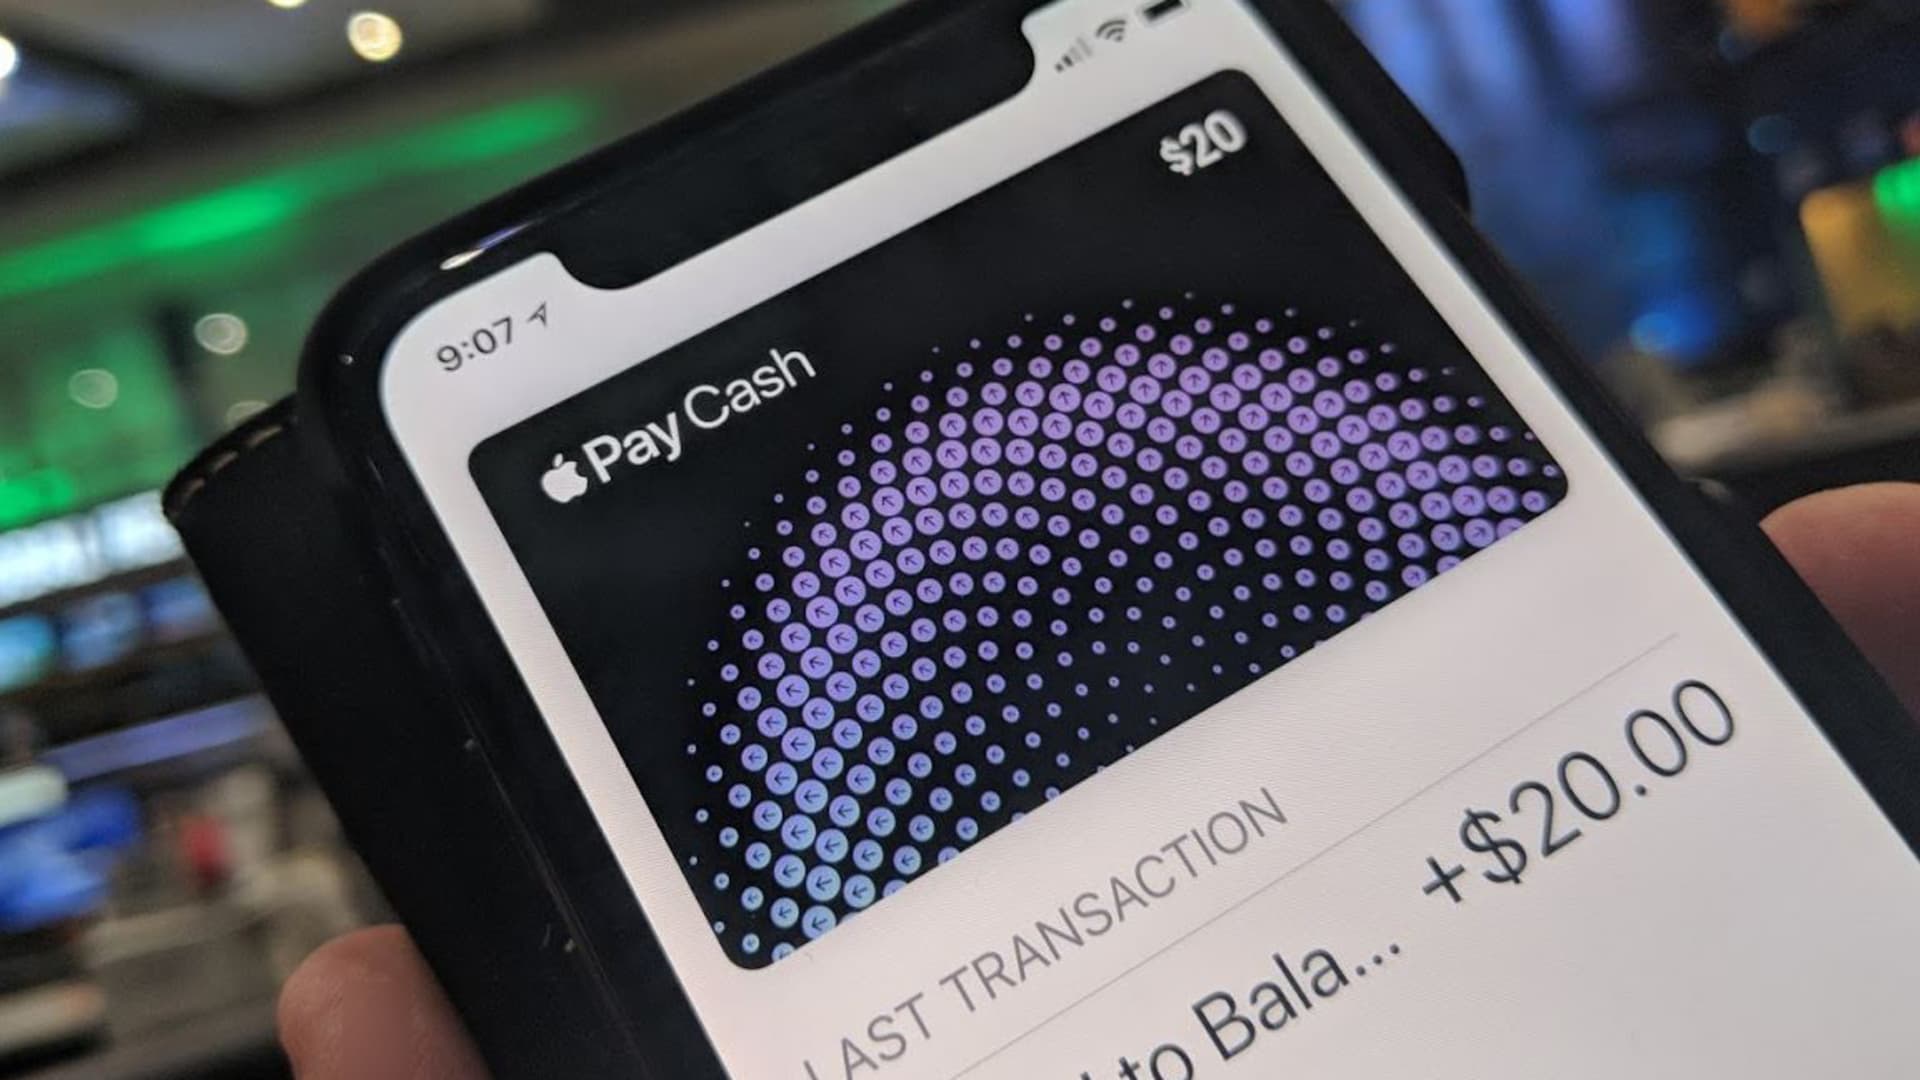 Apple resolves outage affecting its payment features, including Apple Pay, Card, Cash and Wallet